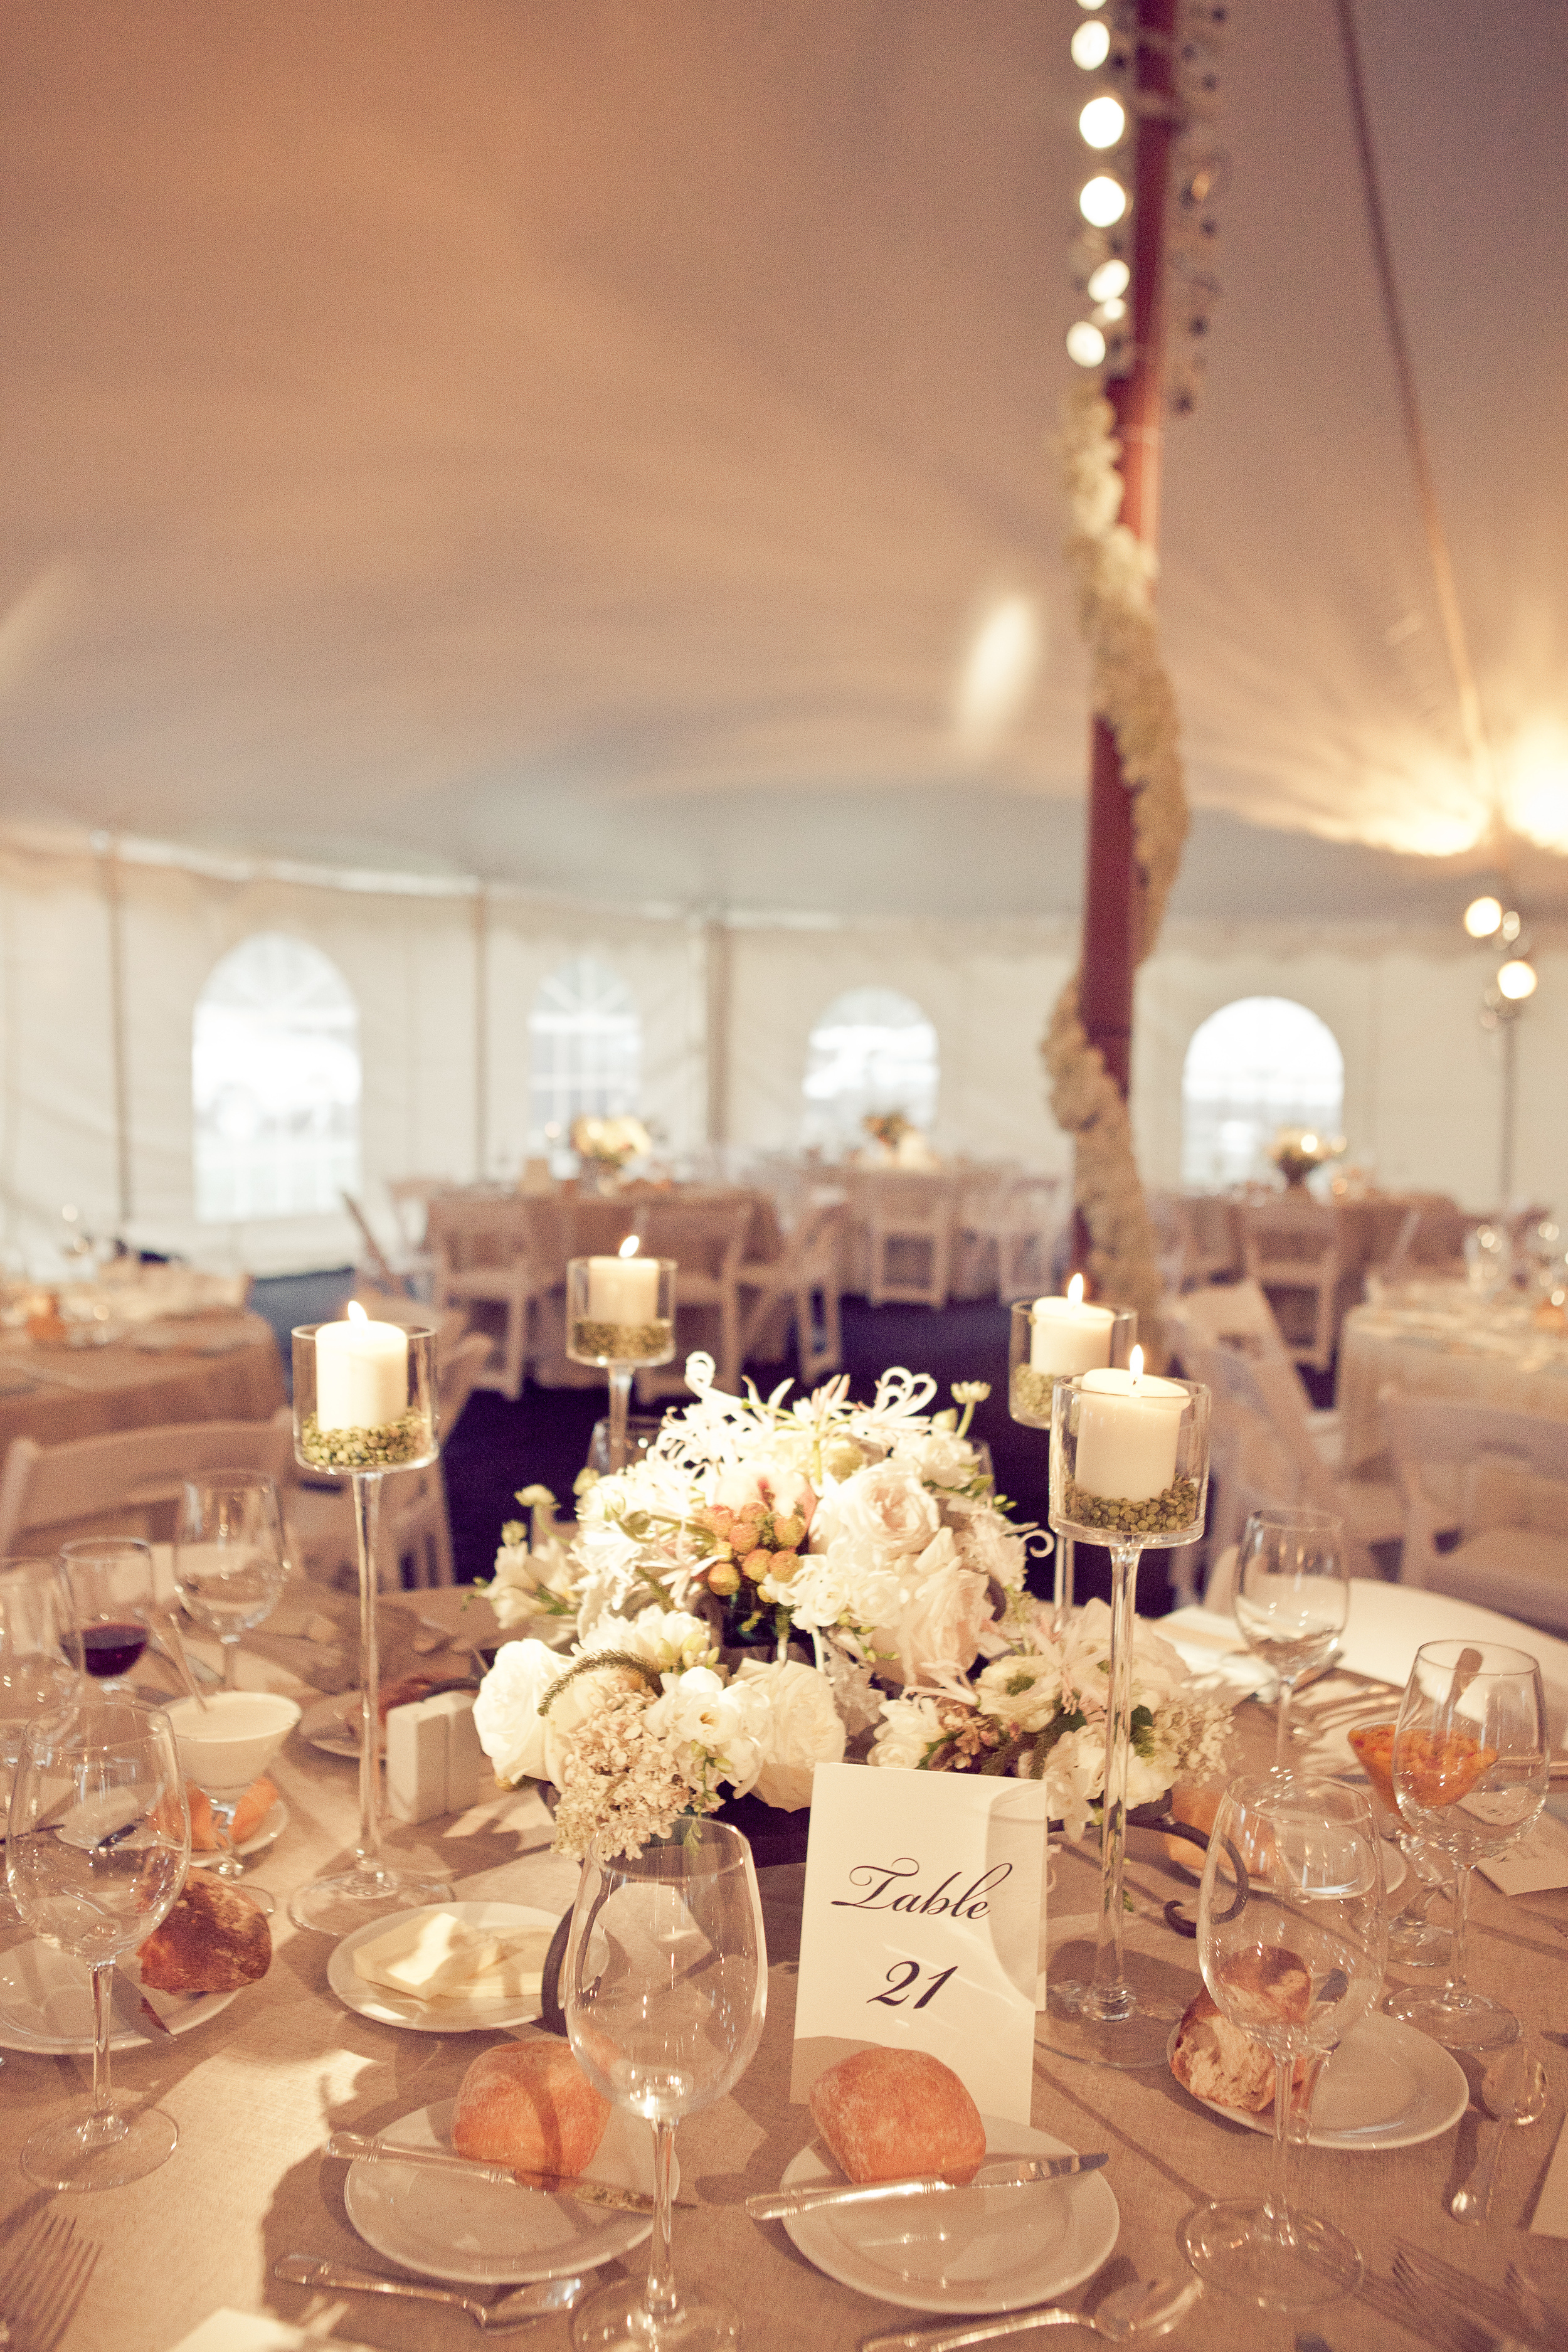 Wedding tent with air conditioning